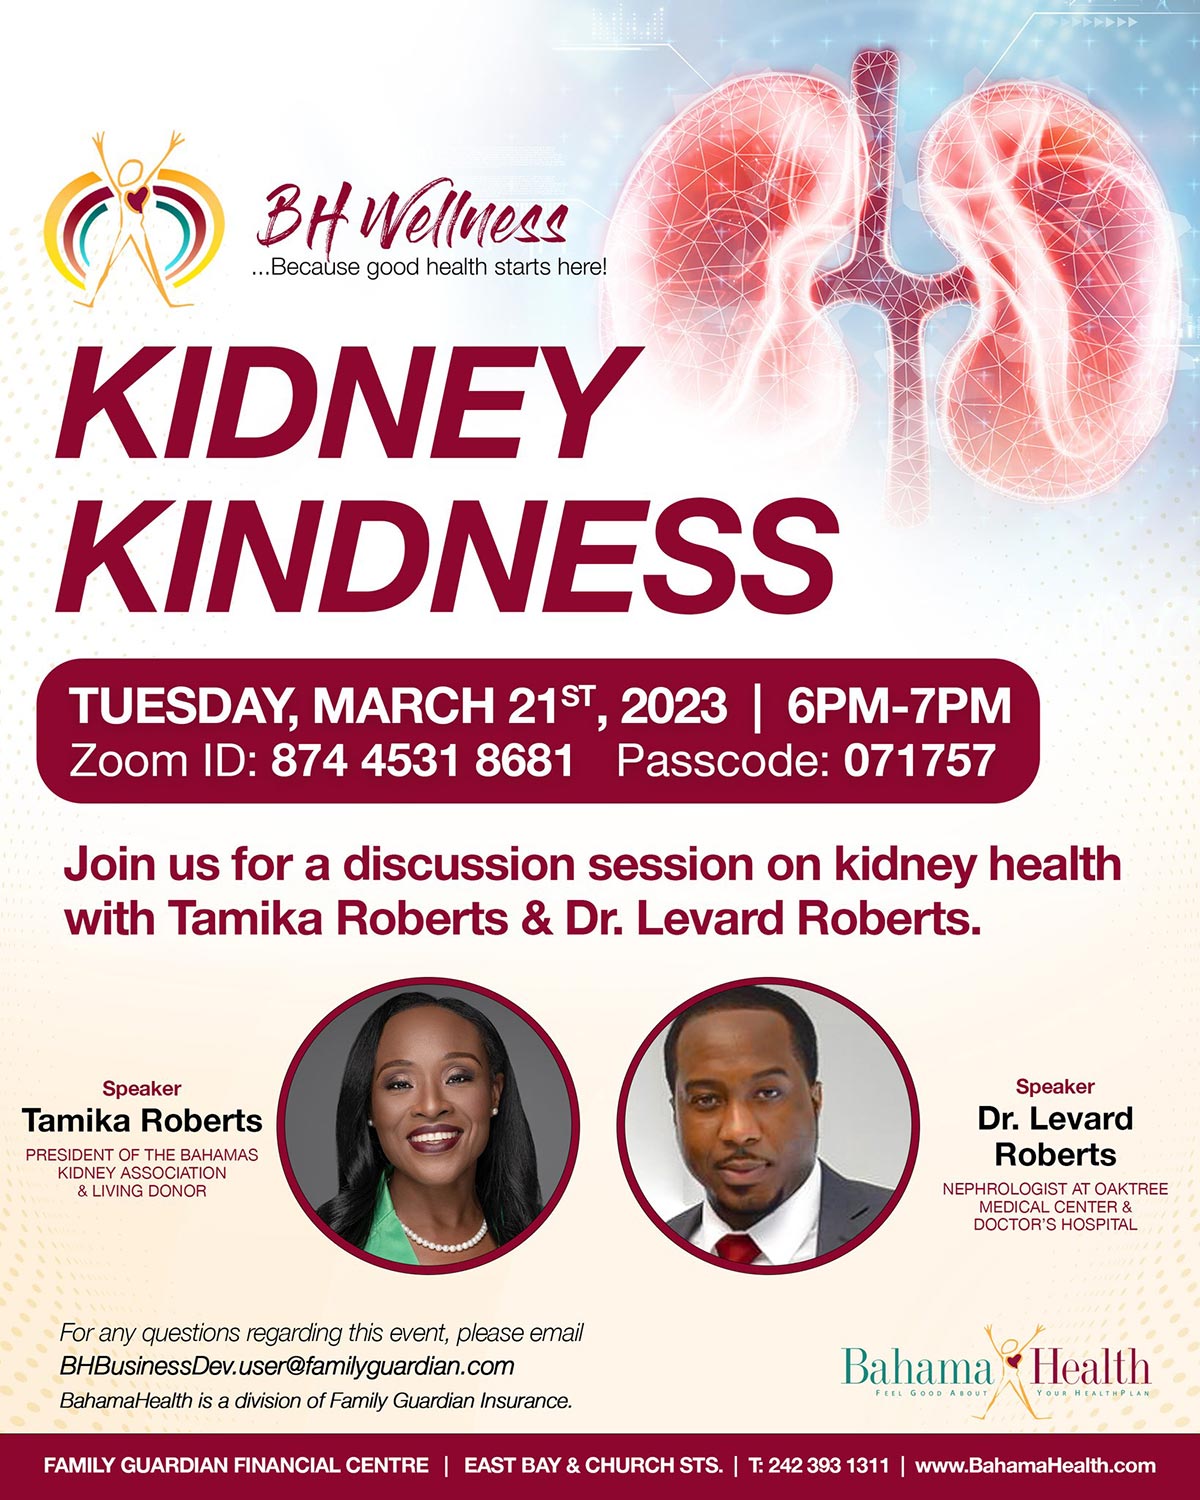 Kidney Kindness with Tamika Roberts and Dr. Levard Roberts.